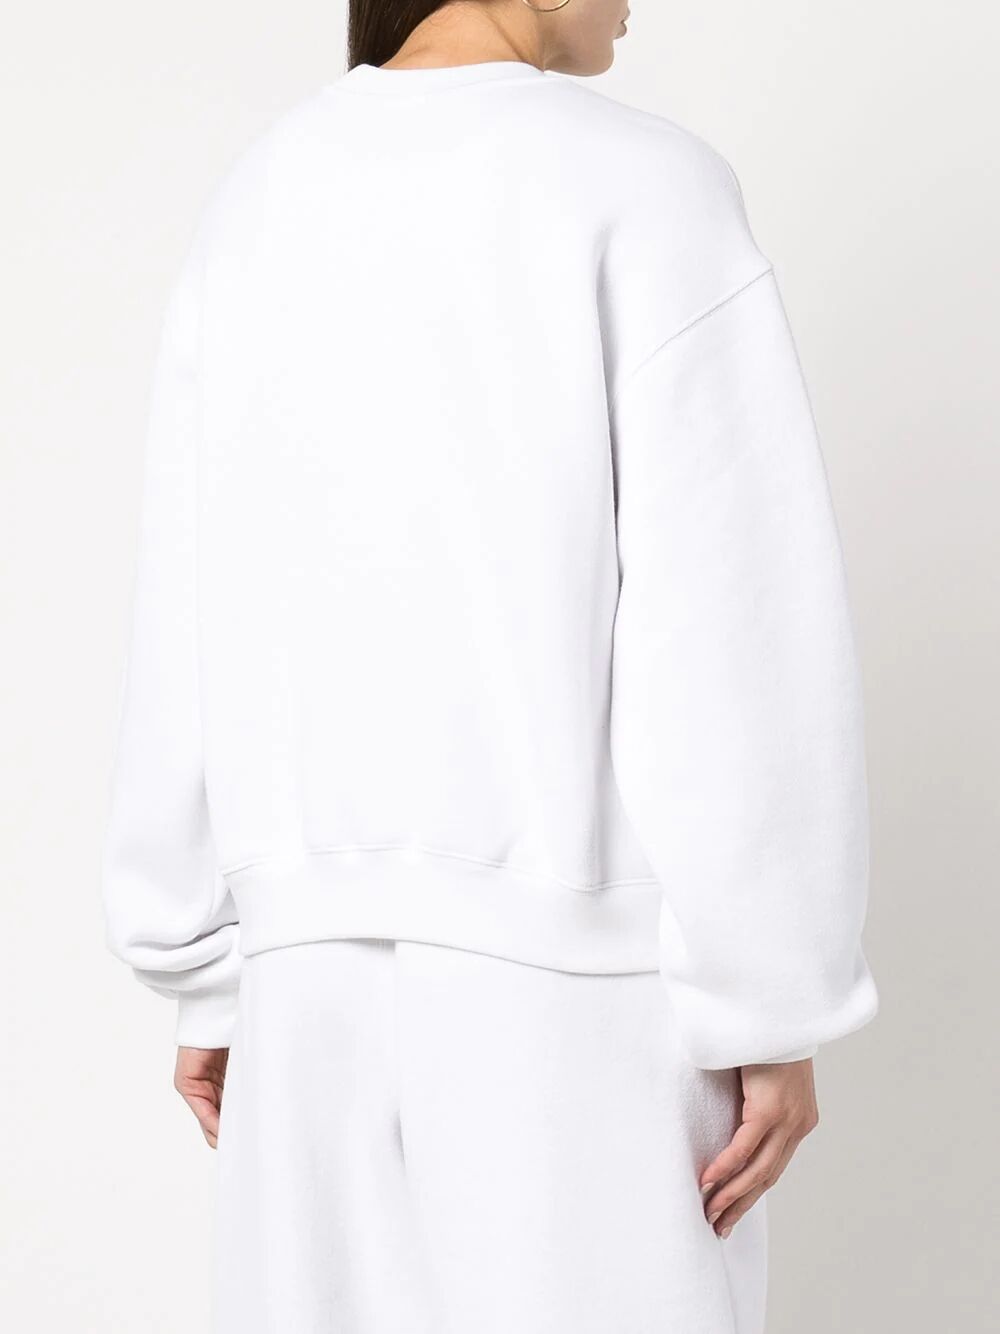 Shop Alexander Wang Essential Terry Crew Sweatshirt With Puff Paint Logo In White